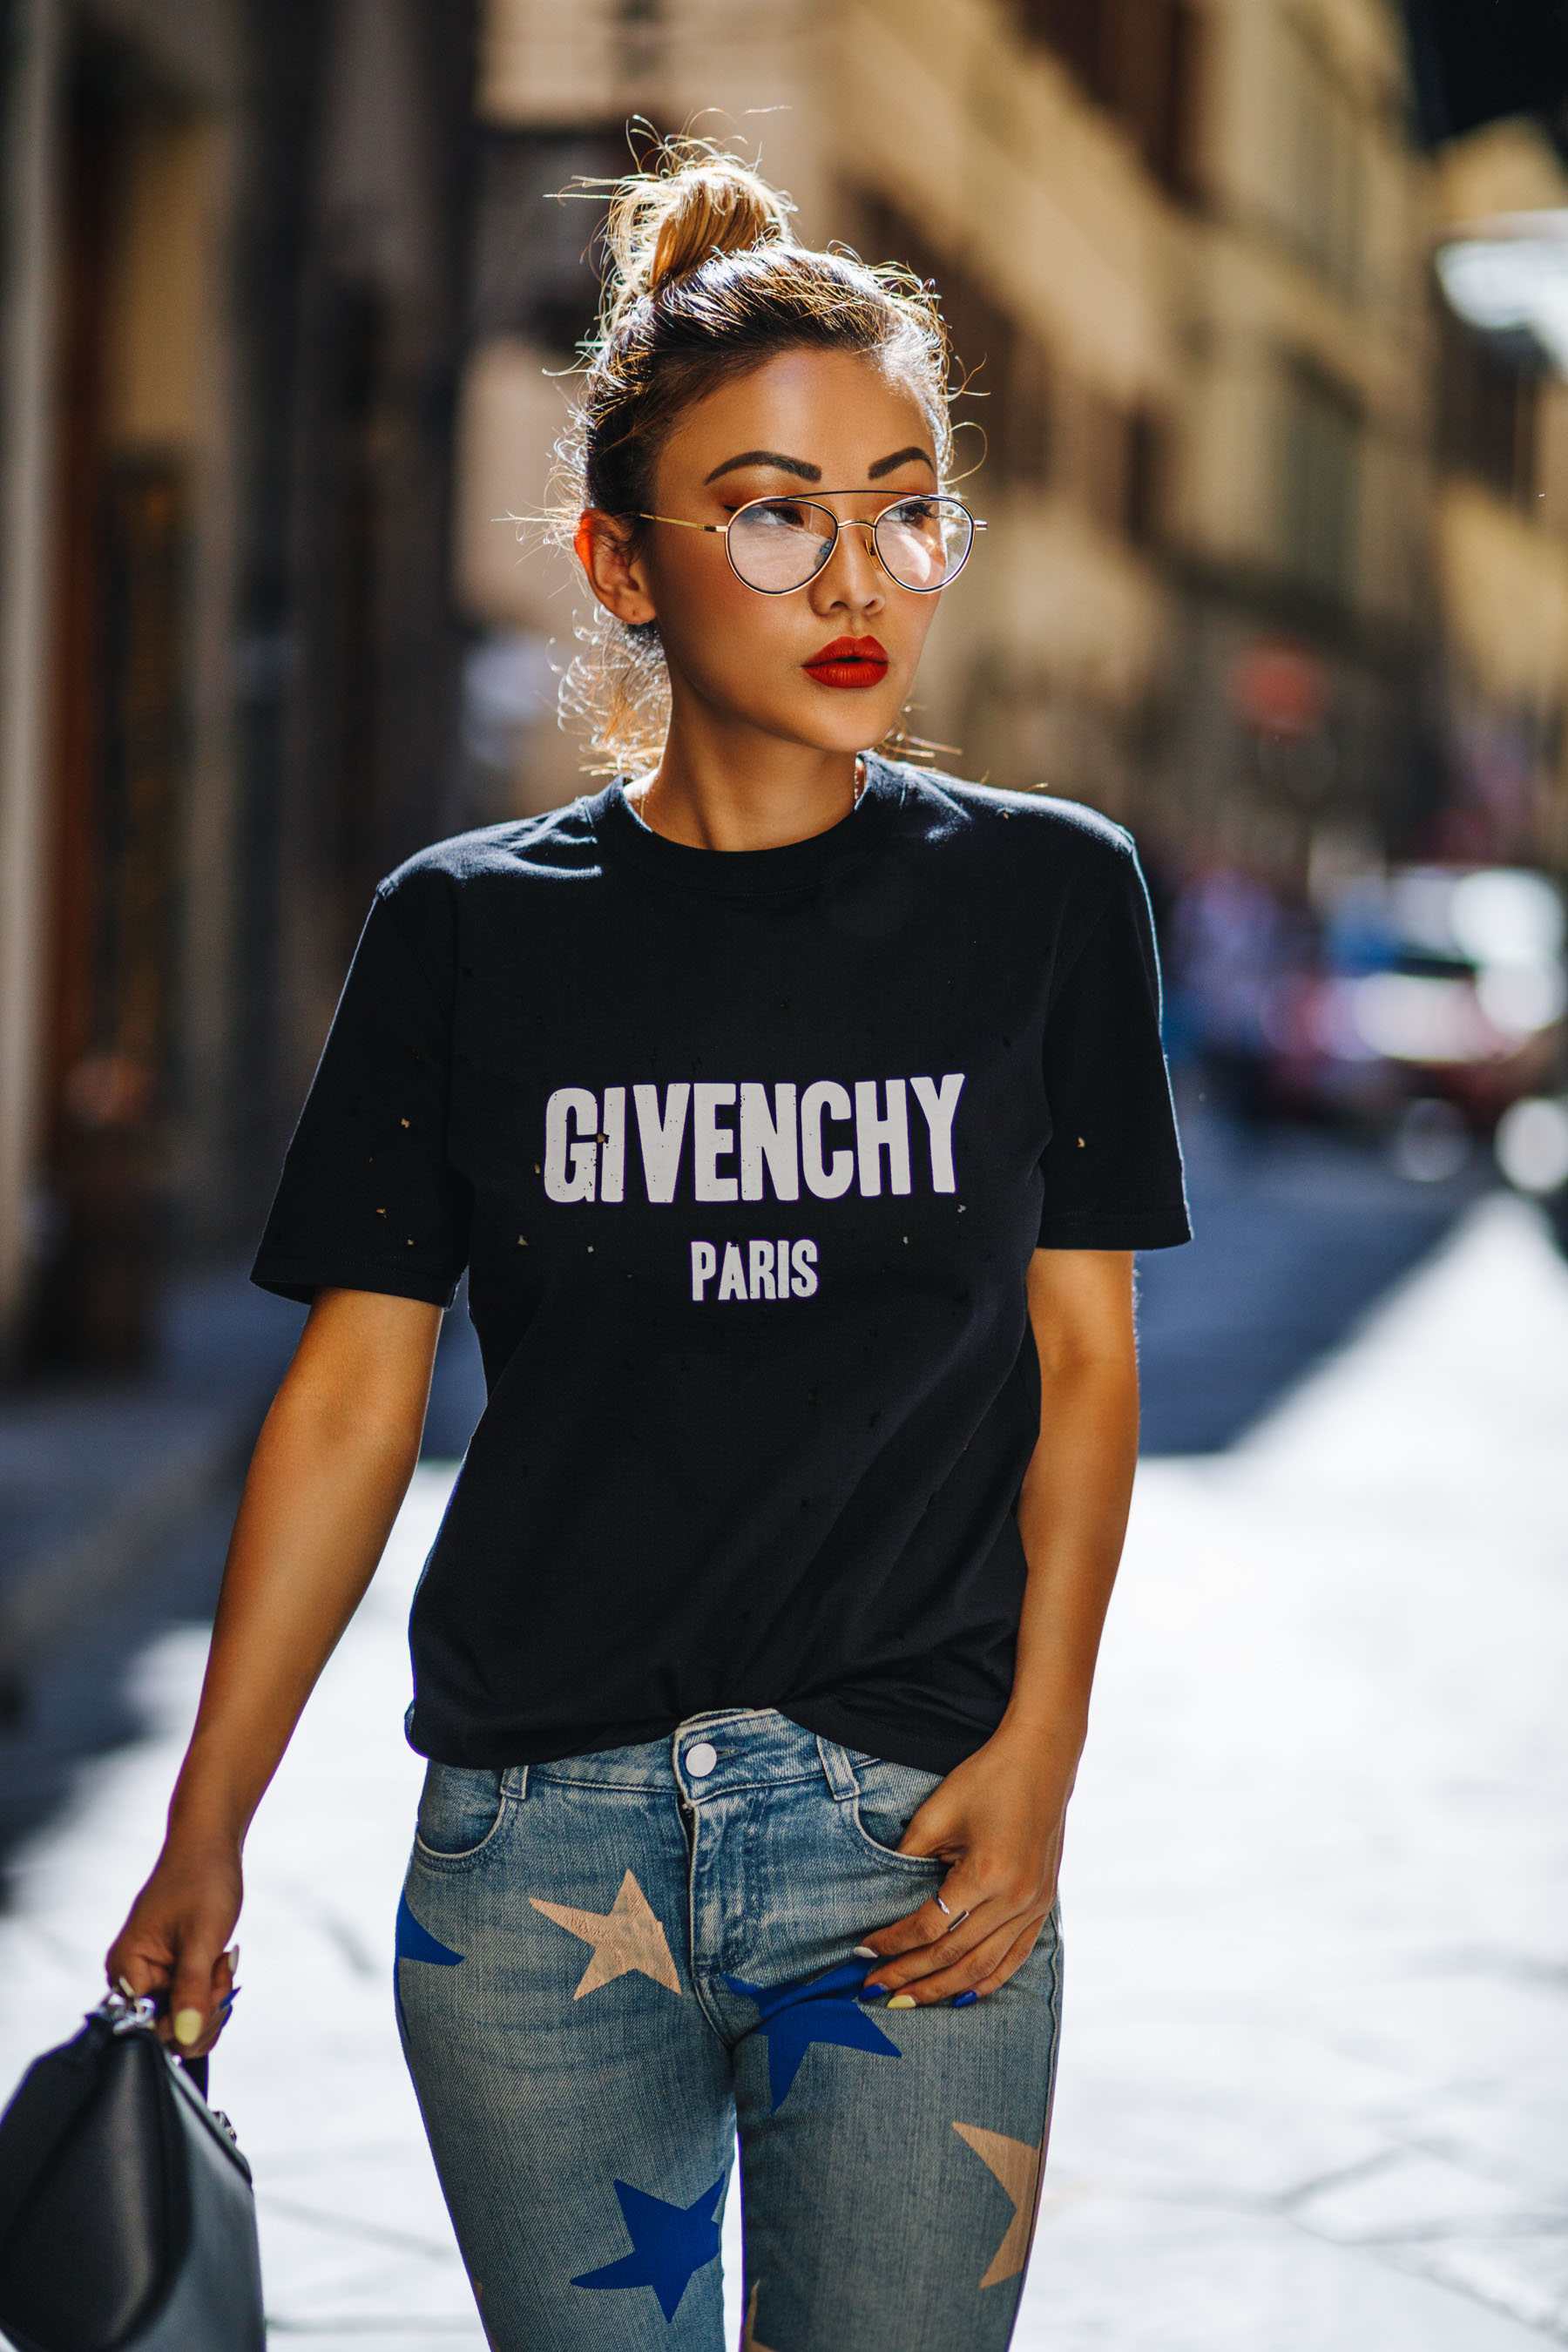 Rock the Logomania Trend - Givenchy T-Shirt with Stella McCartney Star Print Jeans // NotJessFashion.com